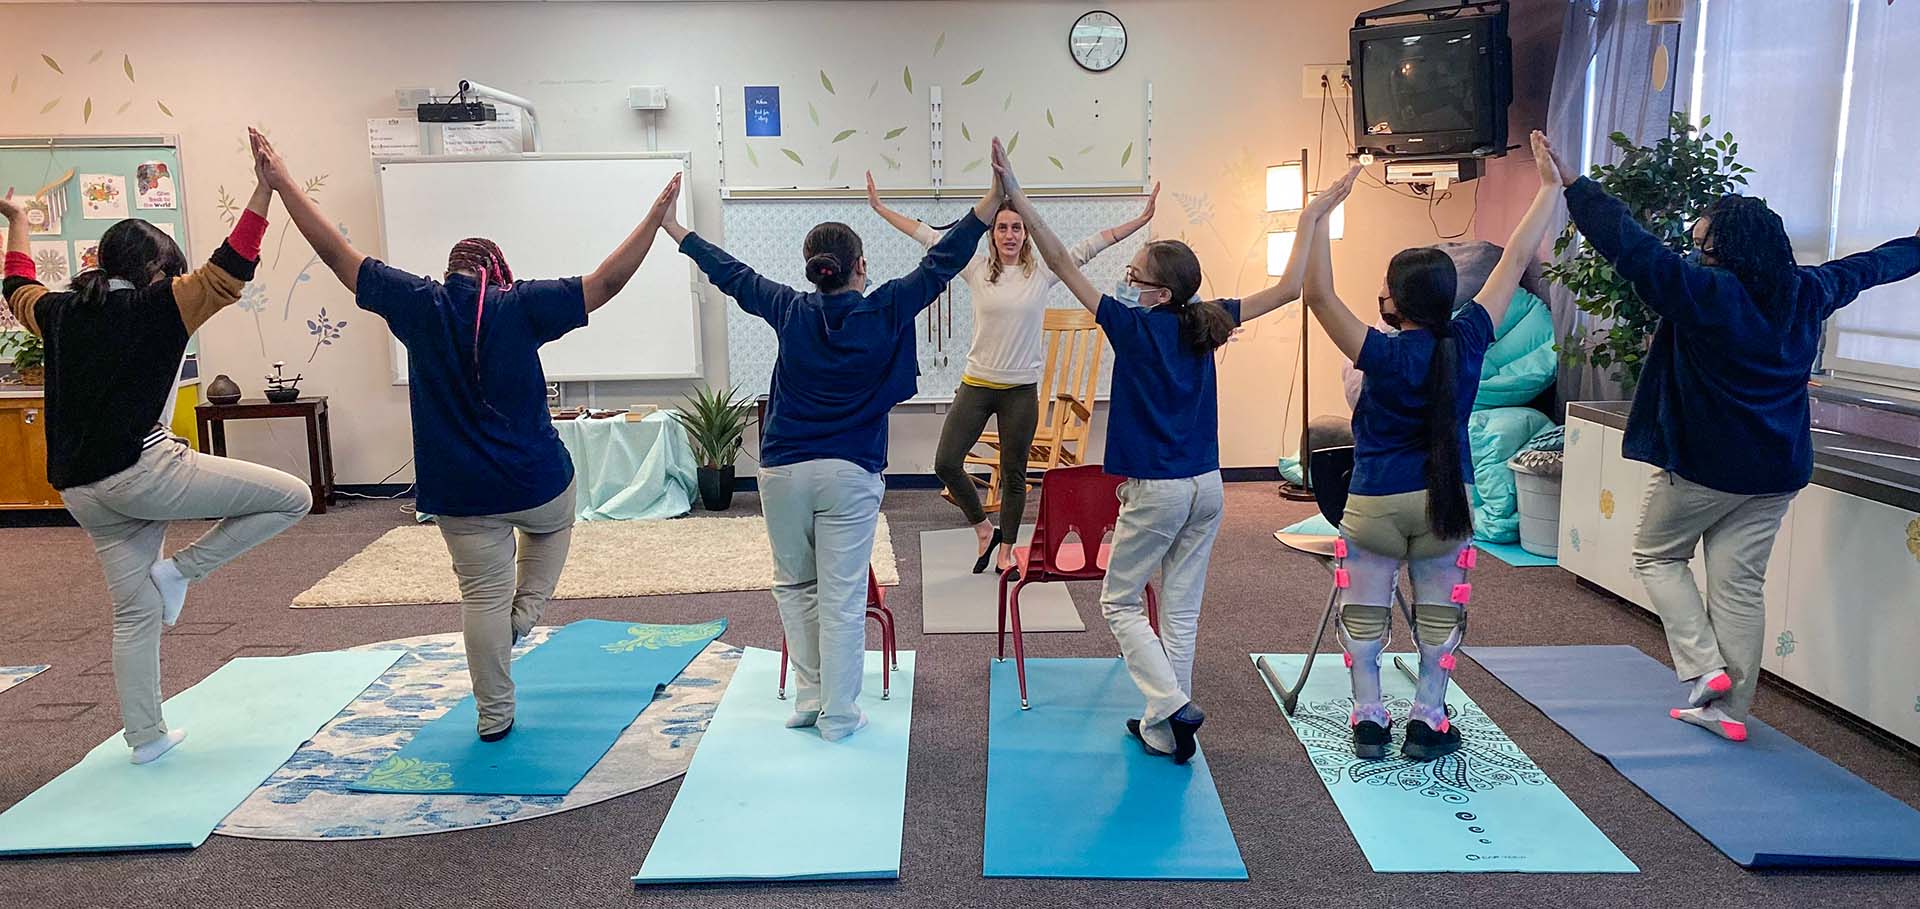 Mindfulness and yoga help to meet students' social-emotional needs